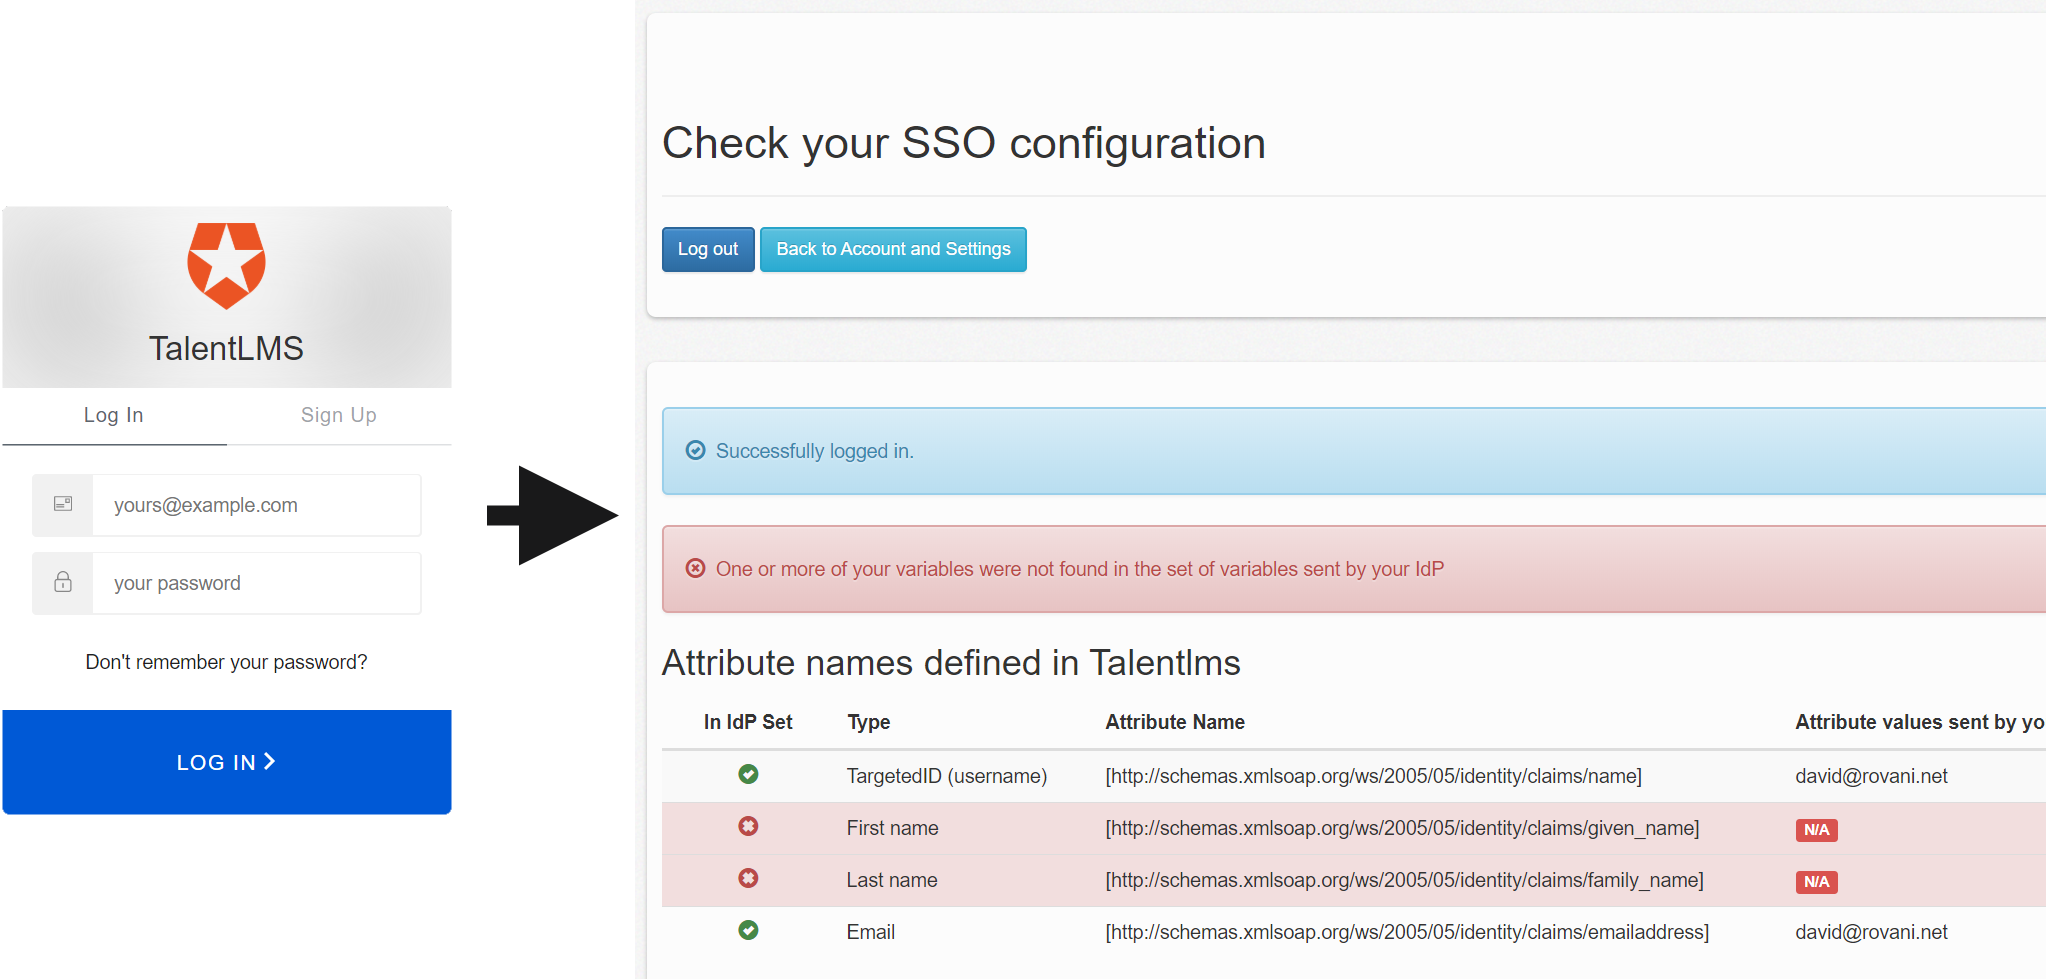 TalentLMS Check your SSO configuration